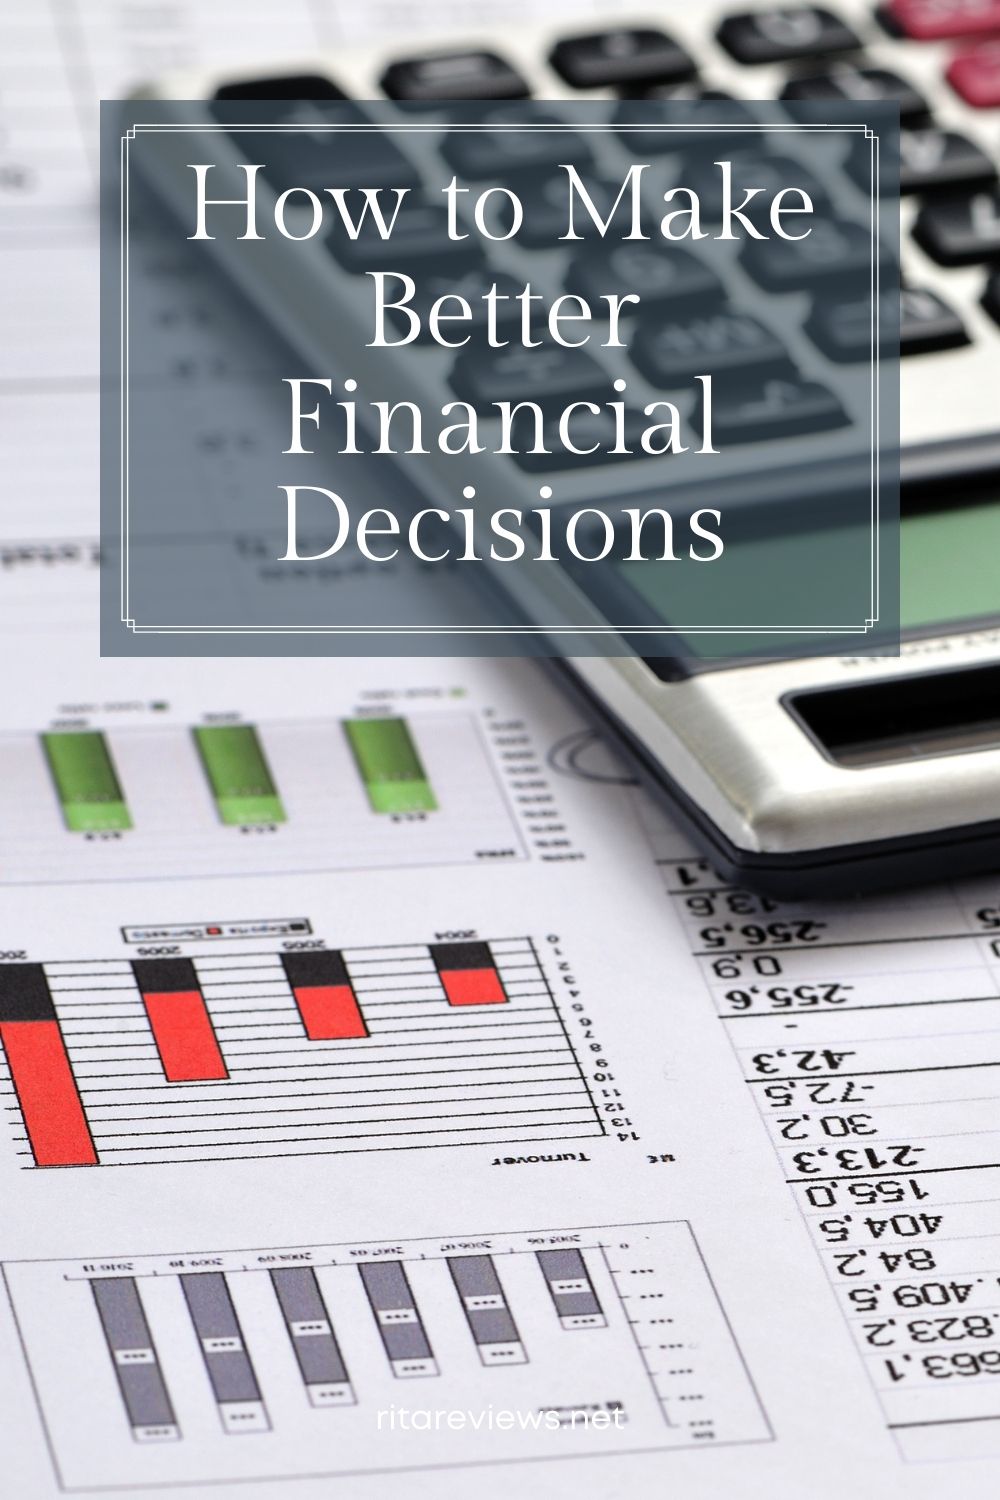 How to Make Better Financial Decisions